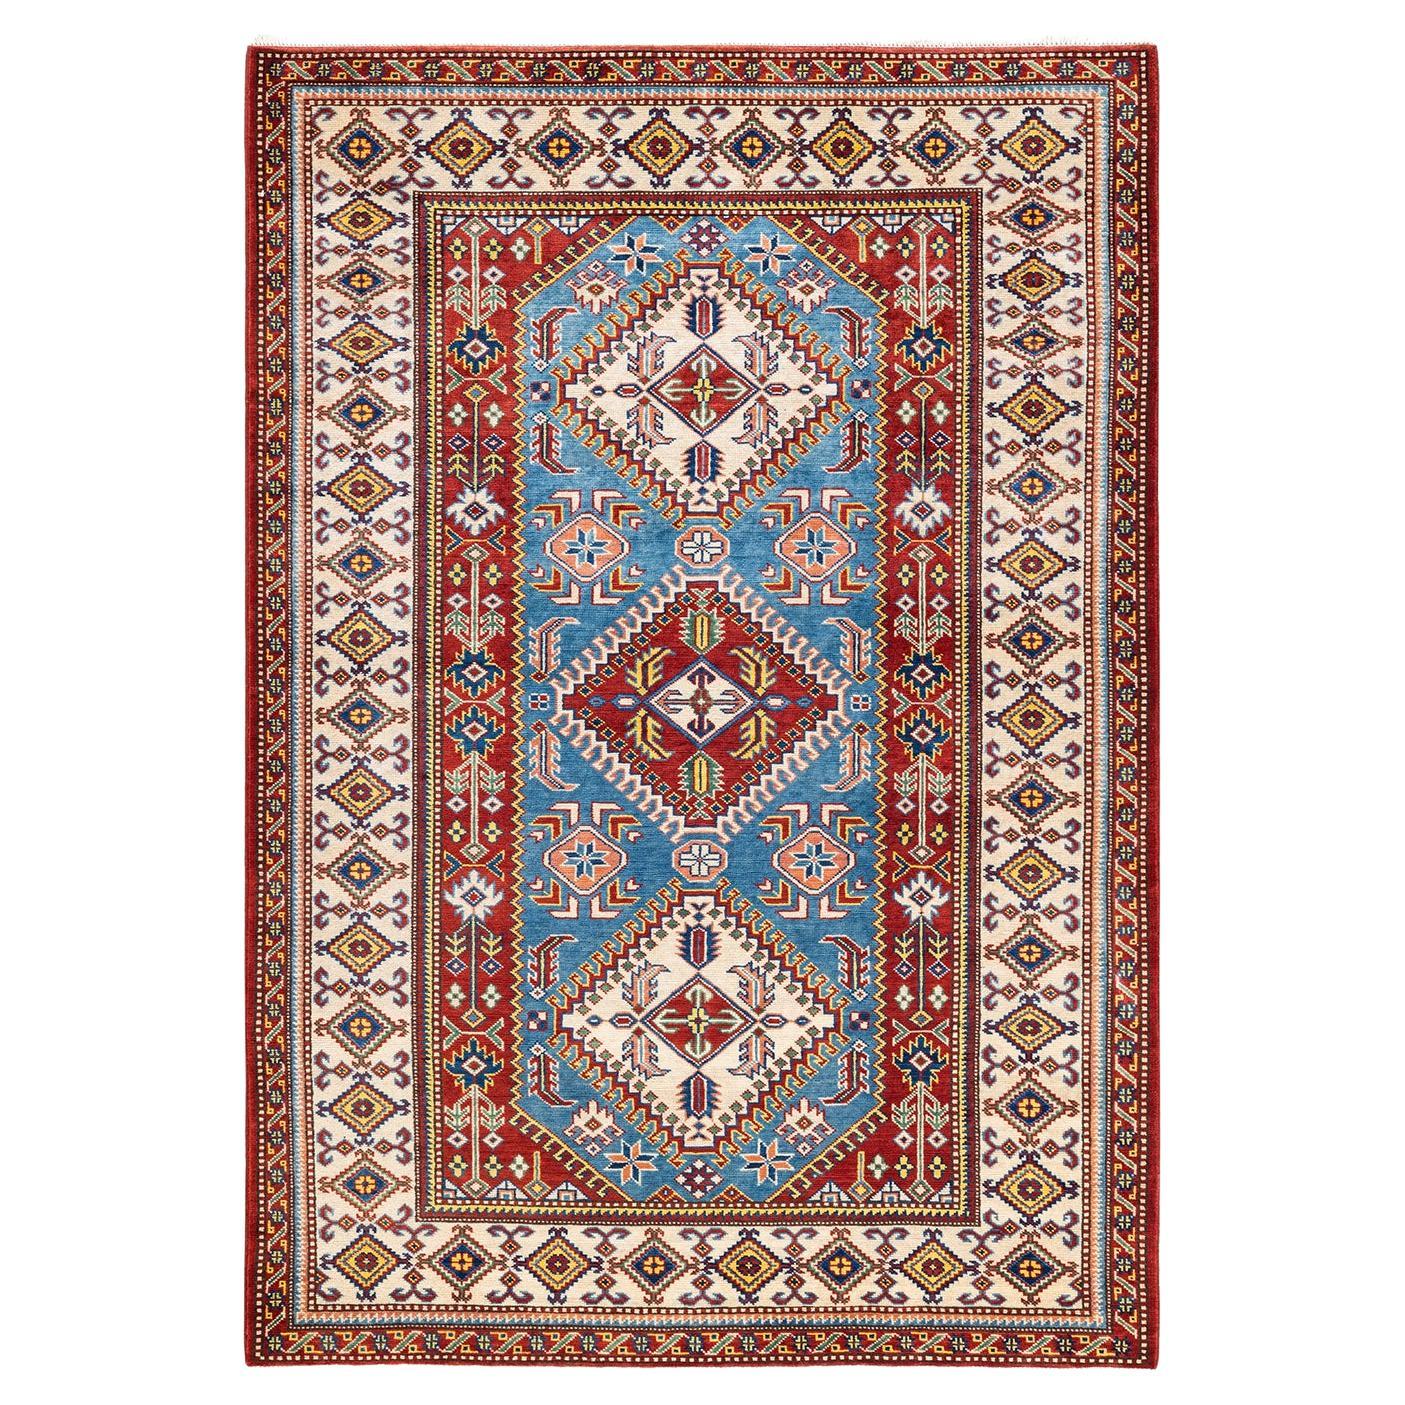 One-of-a-kind Hand Knotted Wool Tribal Red Area Rug